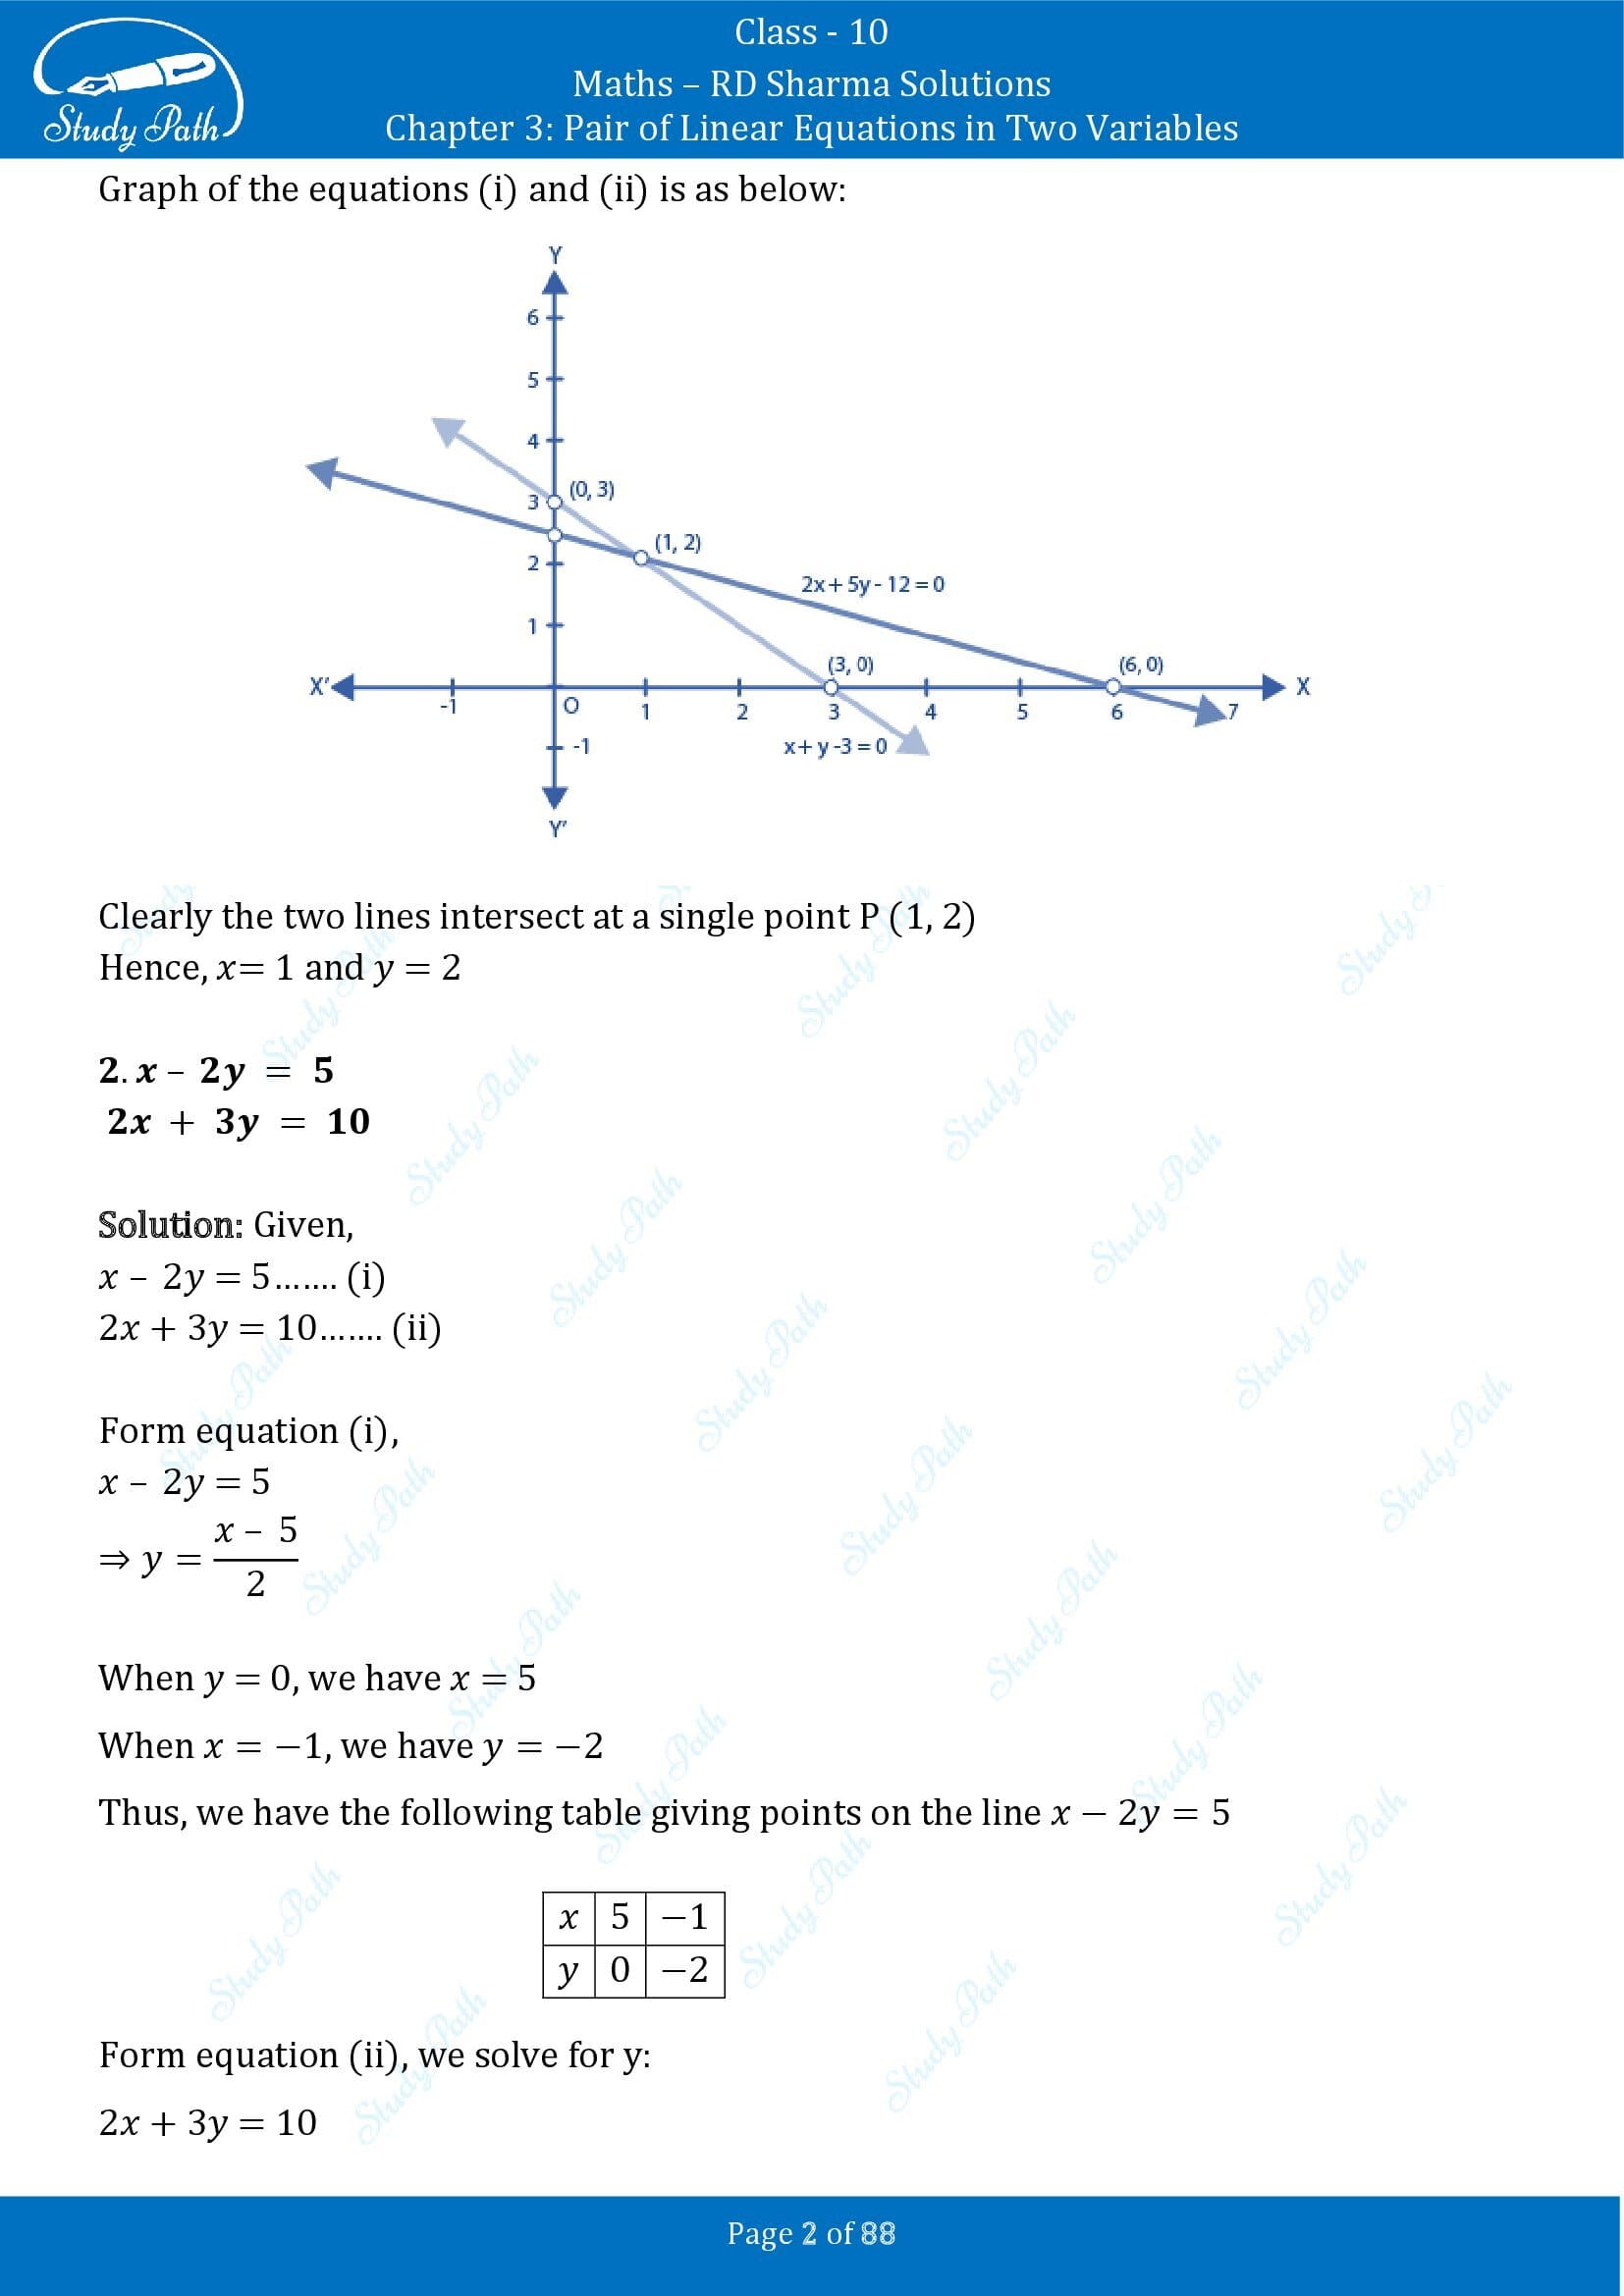 RD Sharma Solutions Class 10 Chapter 3 Pair of Linear Equations in Two Variables Exercise 3.2 00002